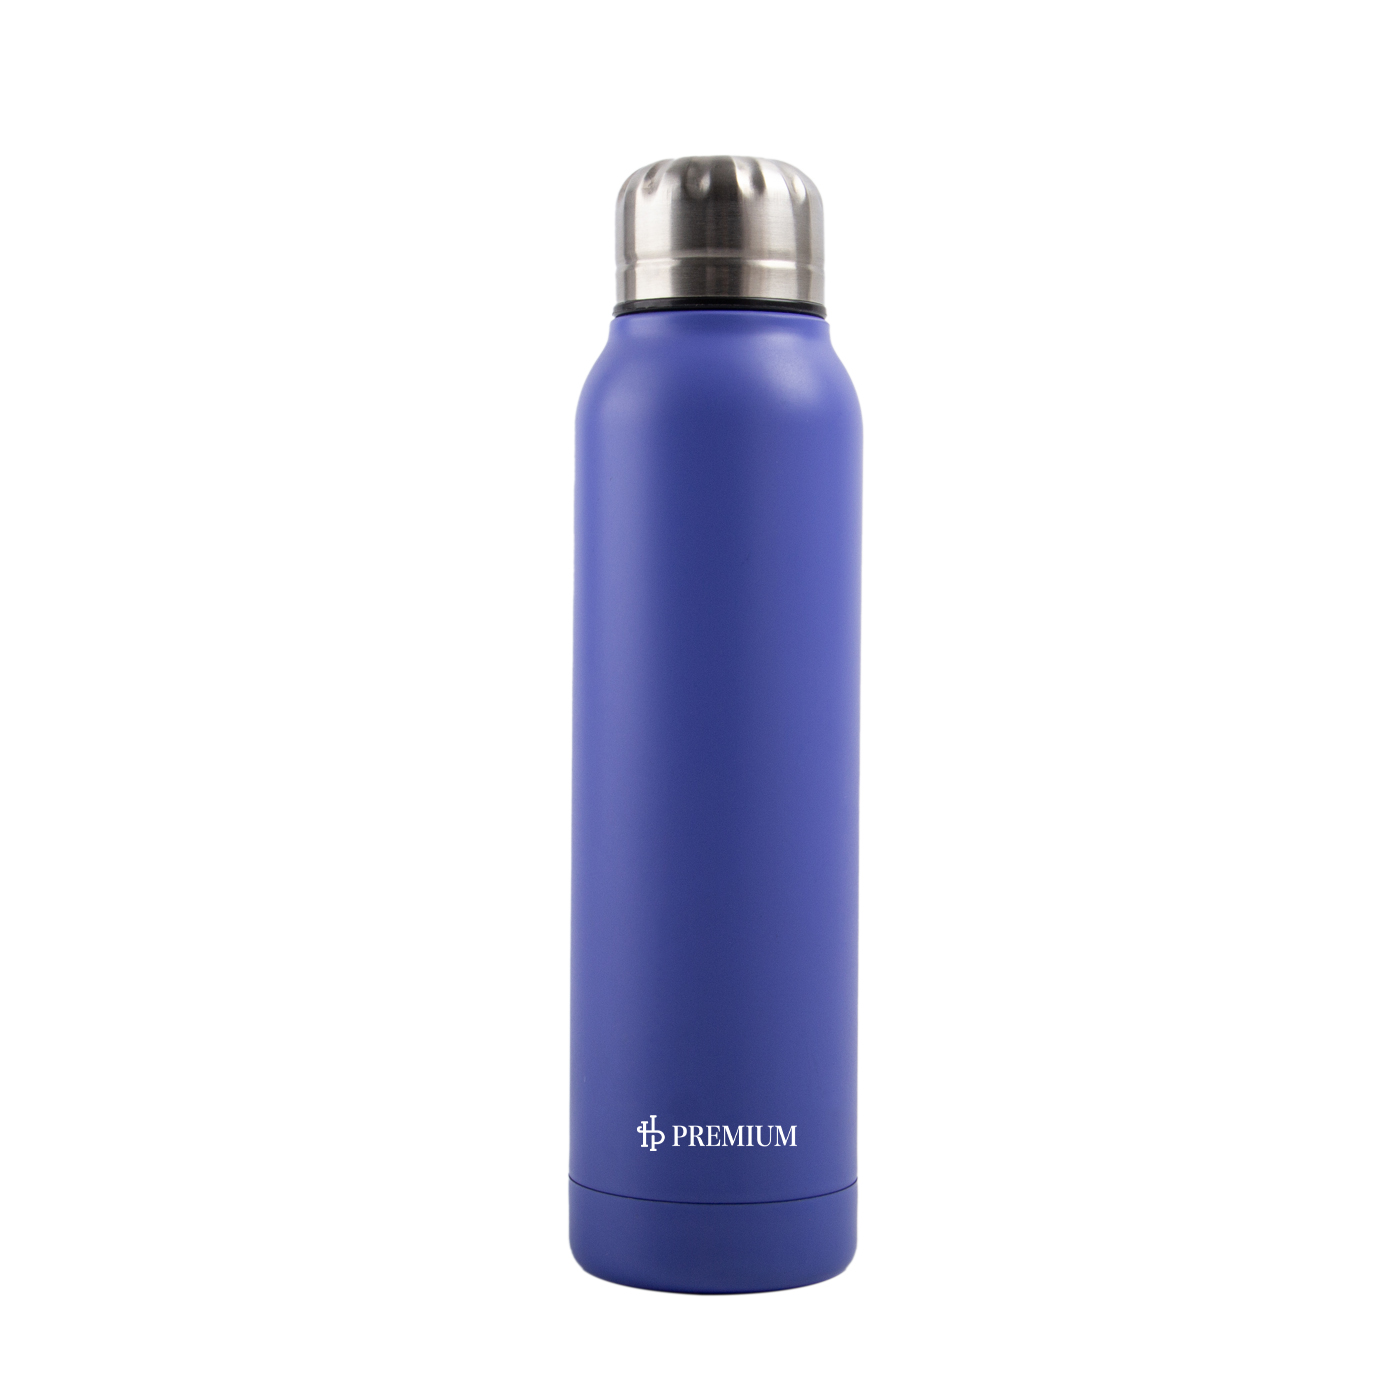 12 oz. Stainless Steel Insulated Water Bottle For Kids